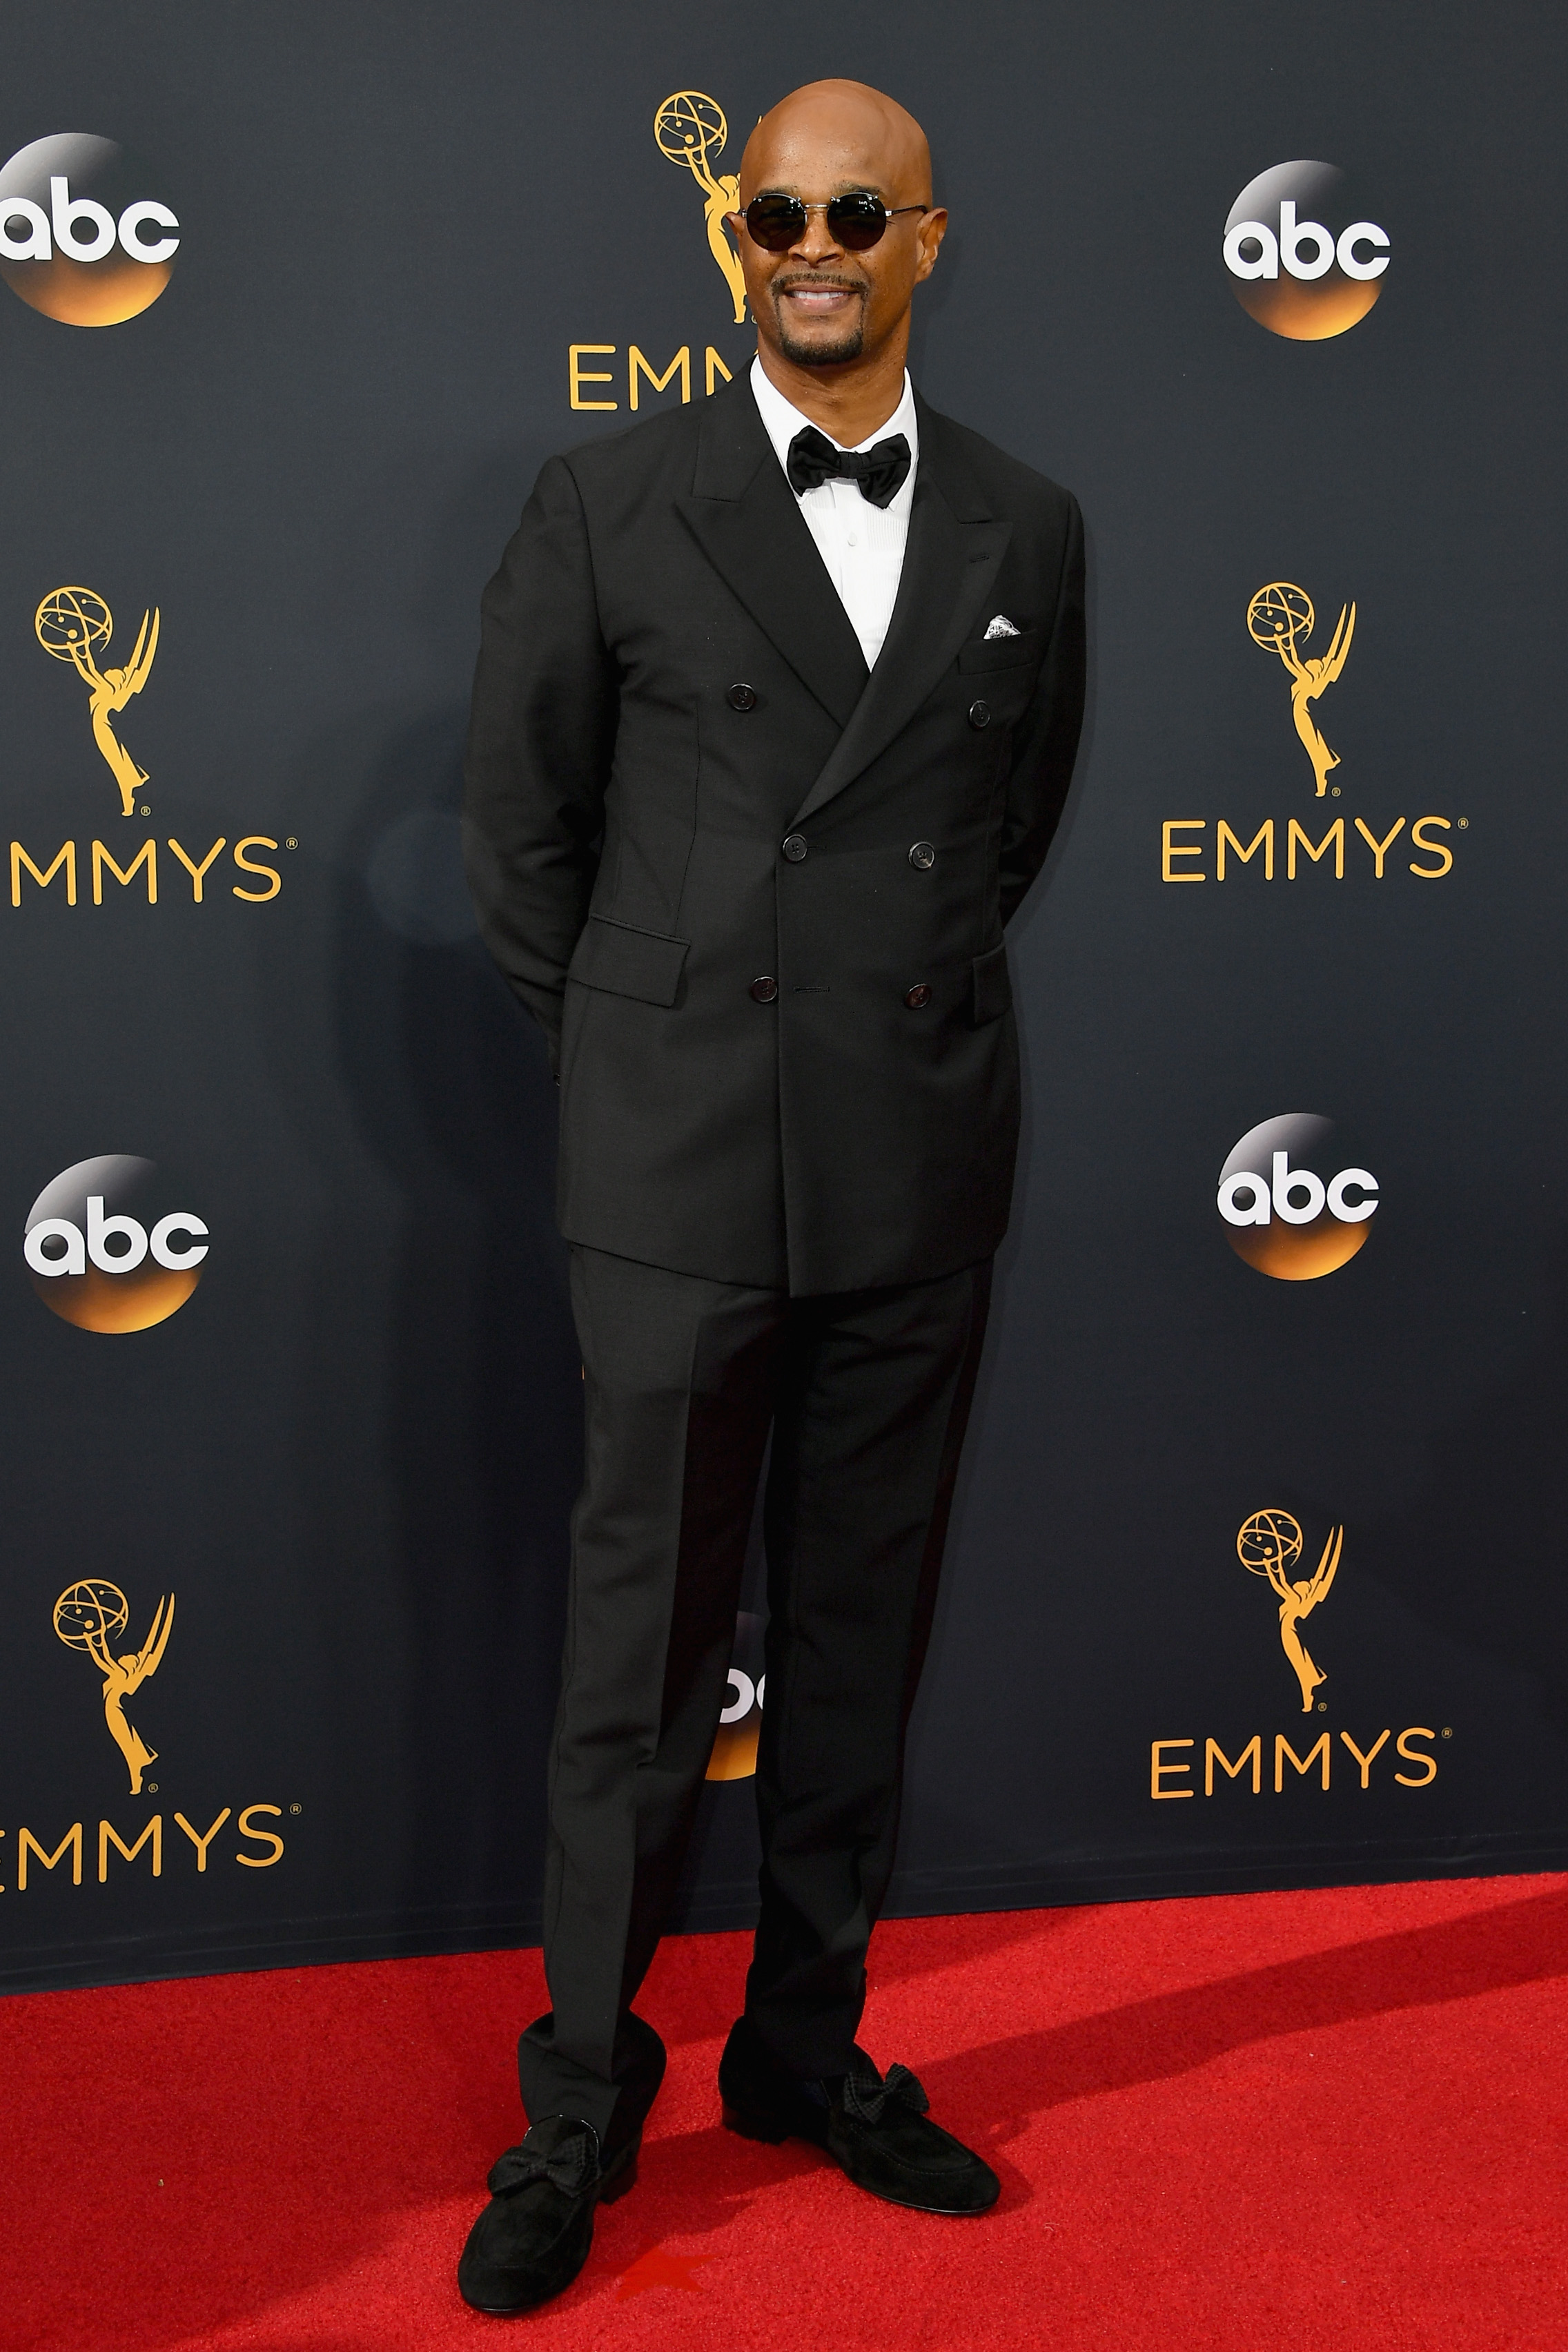 Damon Wayons arrives at the 68th Annual Primetime Emmy Awards at Microsoft Theater on September 18, 2016 in Los Angeles.